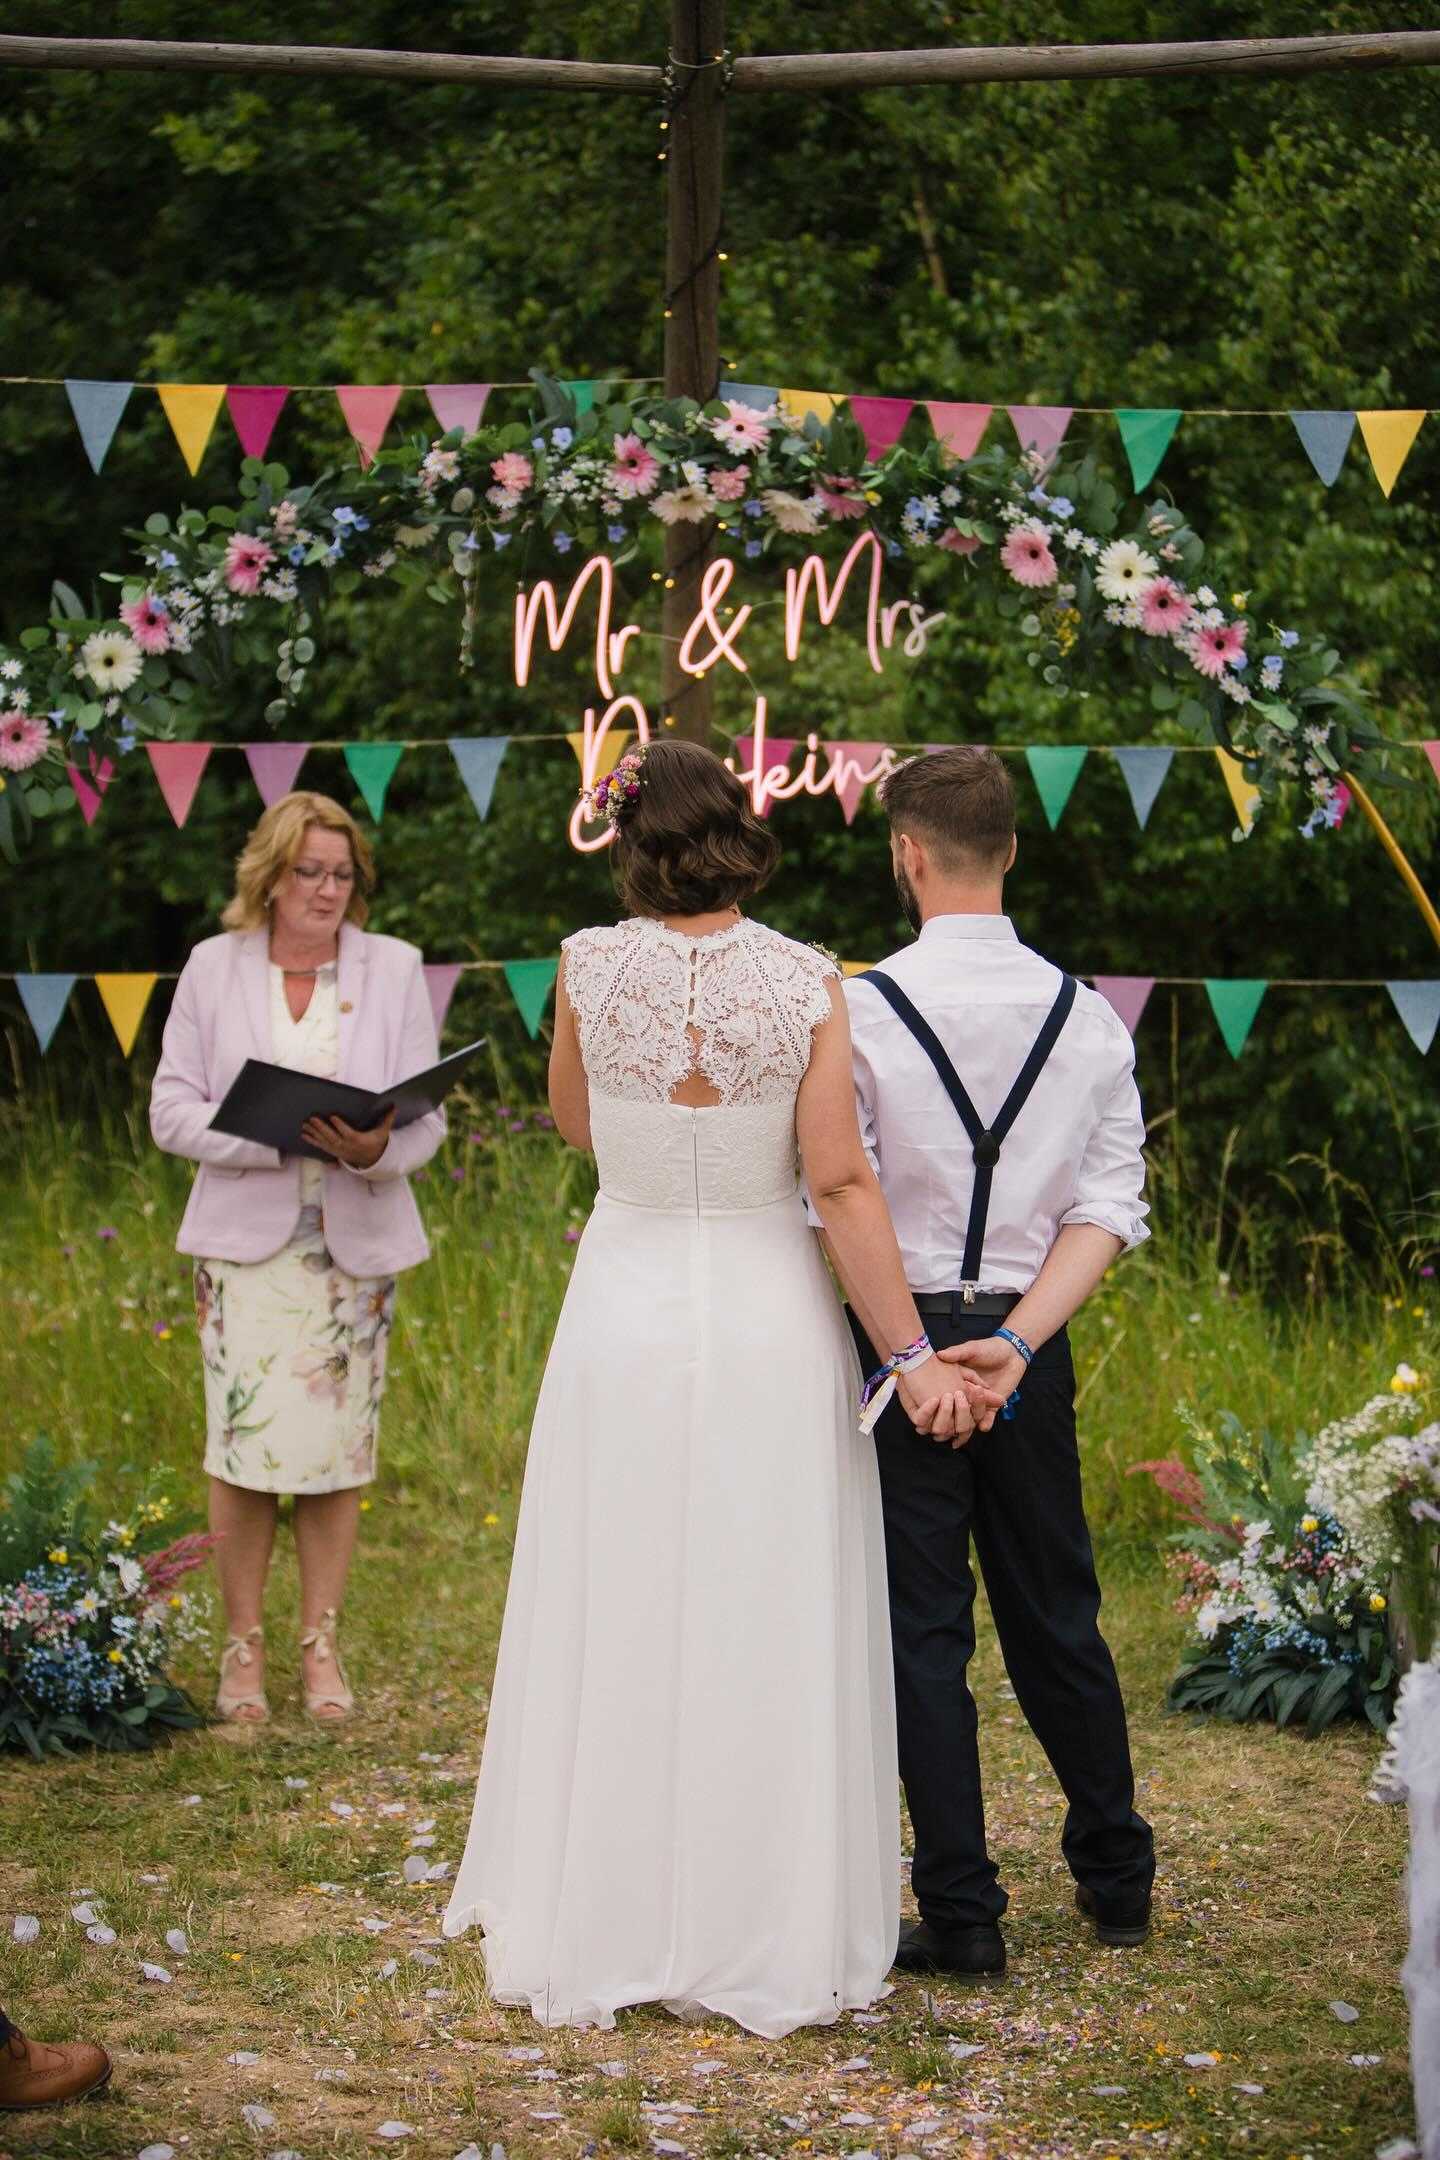 Custom Neon Wedding Signs - Create Your Own LED Wedding Sign